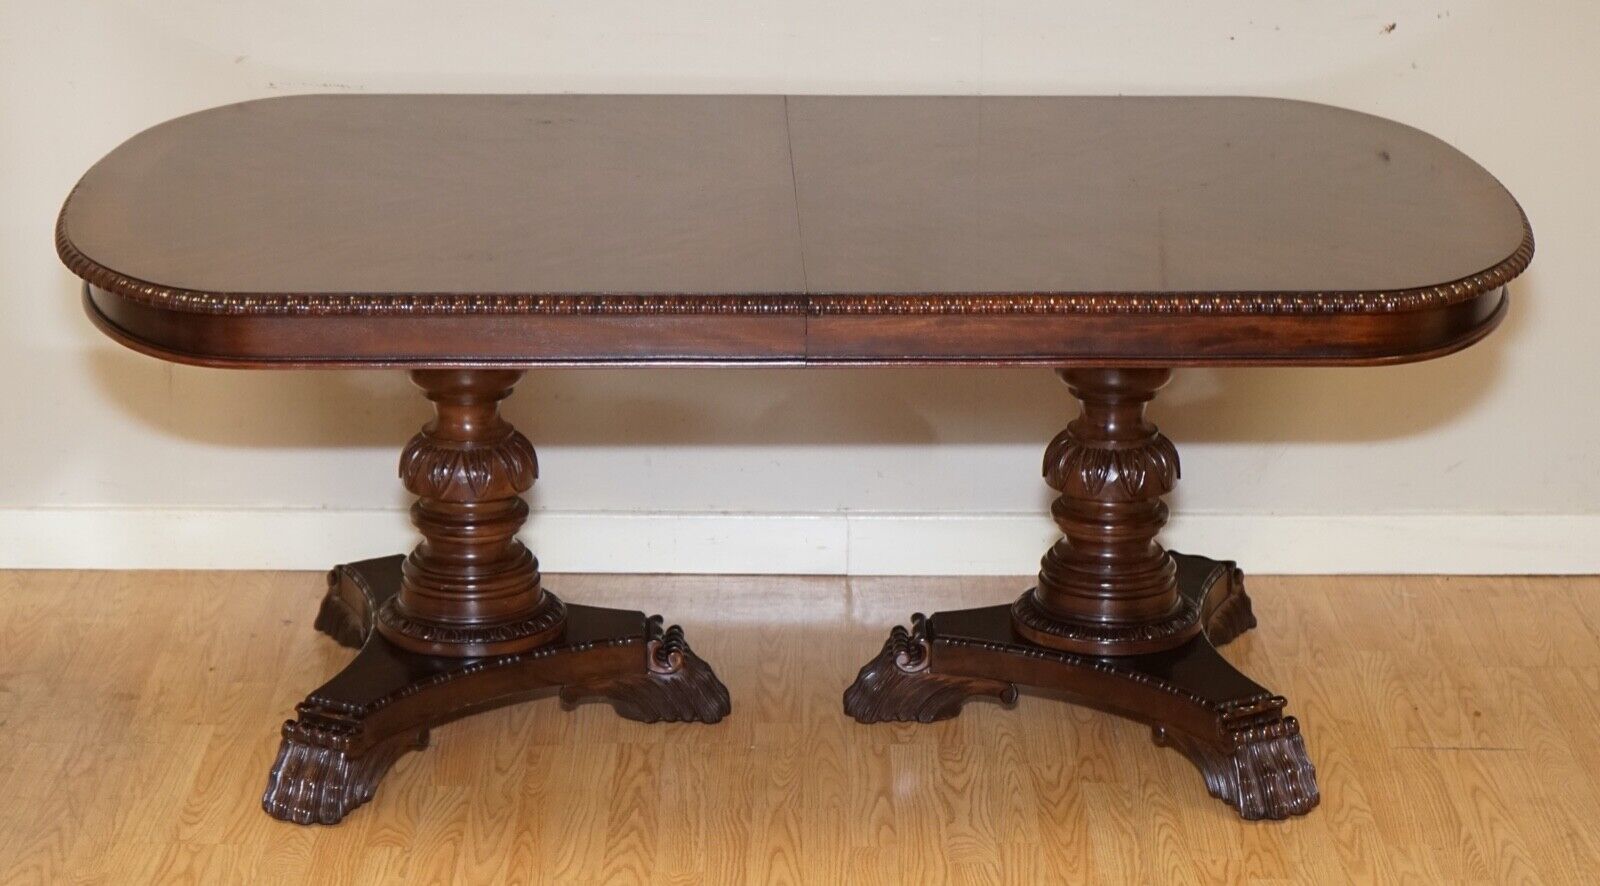 BERNHARDT FURNITURE MAHOGANY TWIN PEDESTAL EXTENDABLE TABLE DINING TABLE